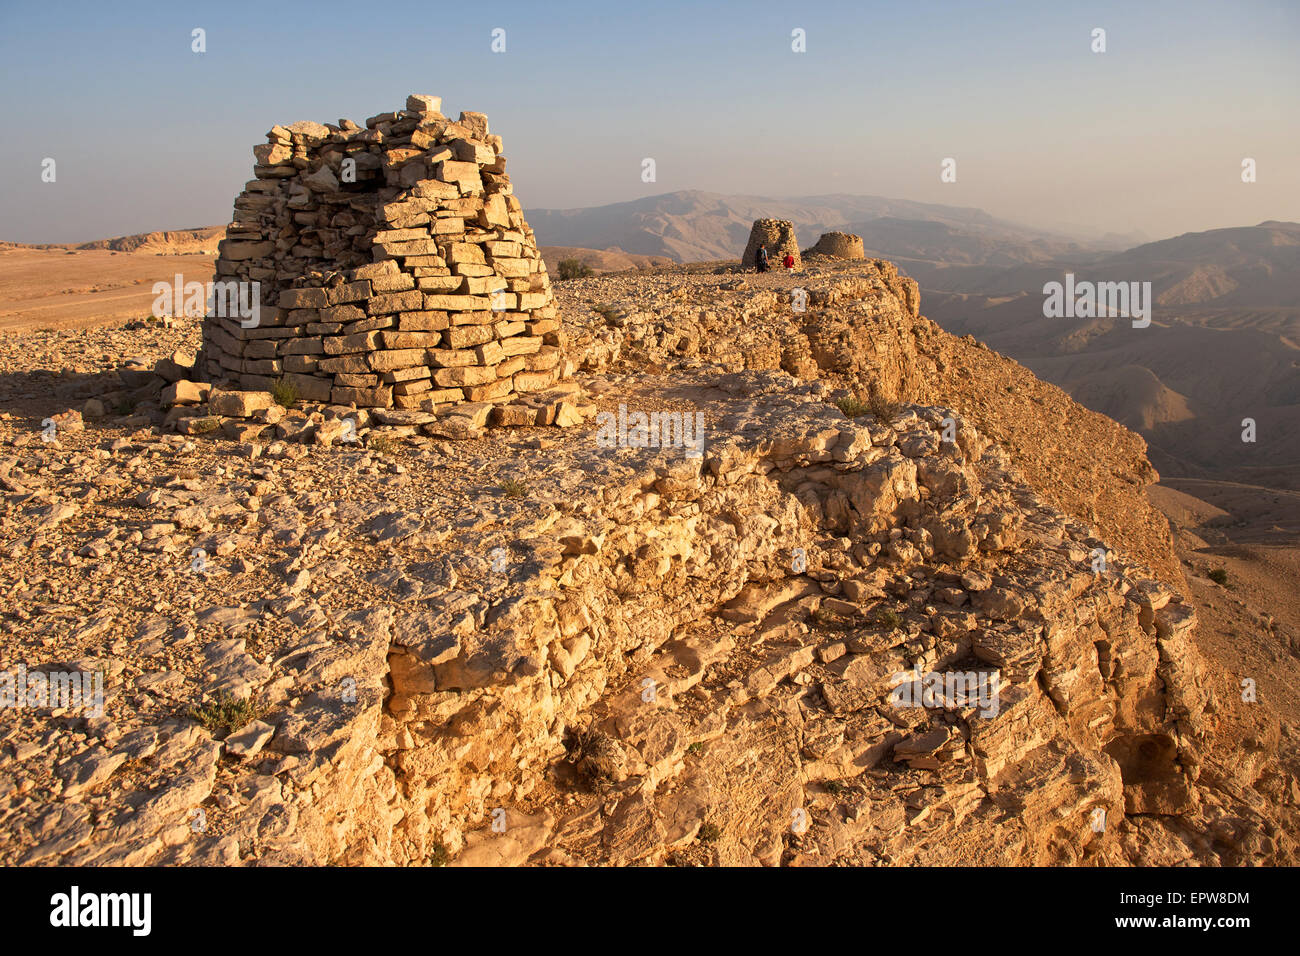 Lined up dramatically atop a rocky ridge, the Beehive Tombs of Bat, in Oman, are a Unesco World Heritage Site. Stock Photo